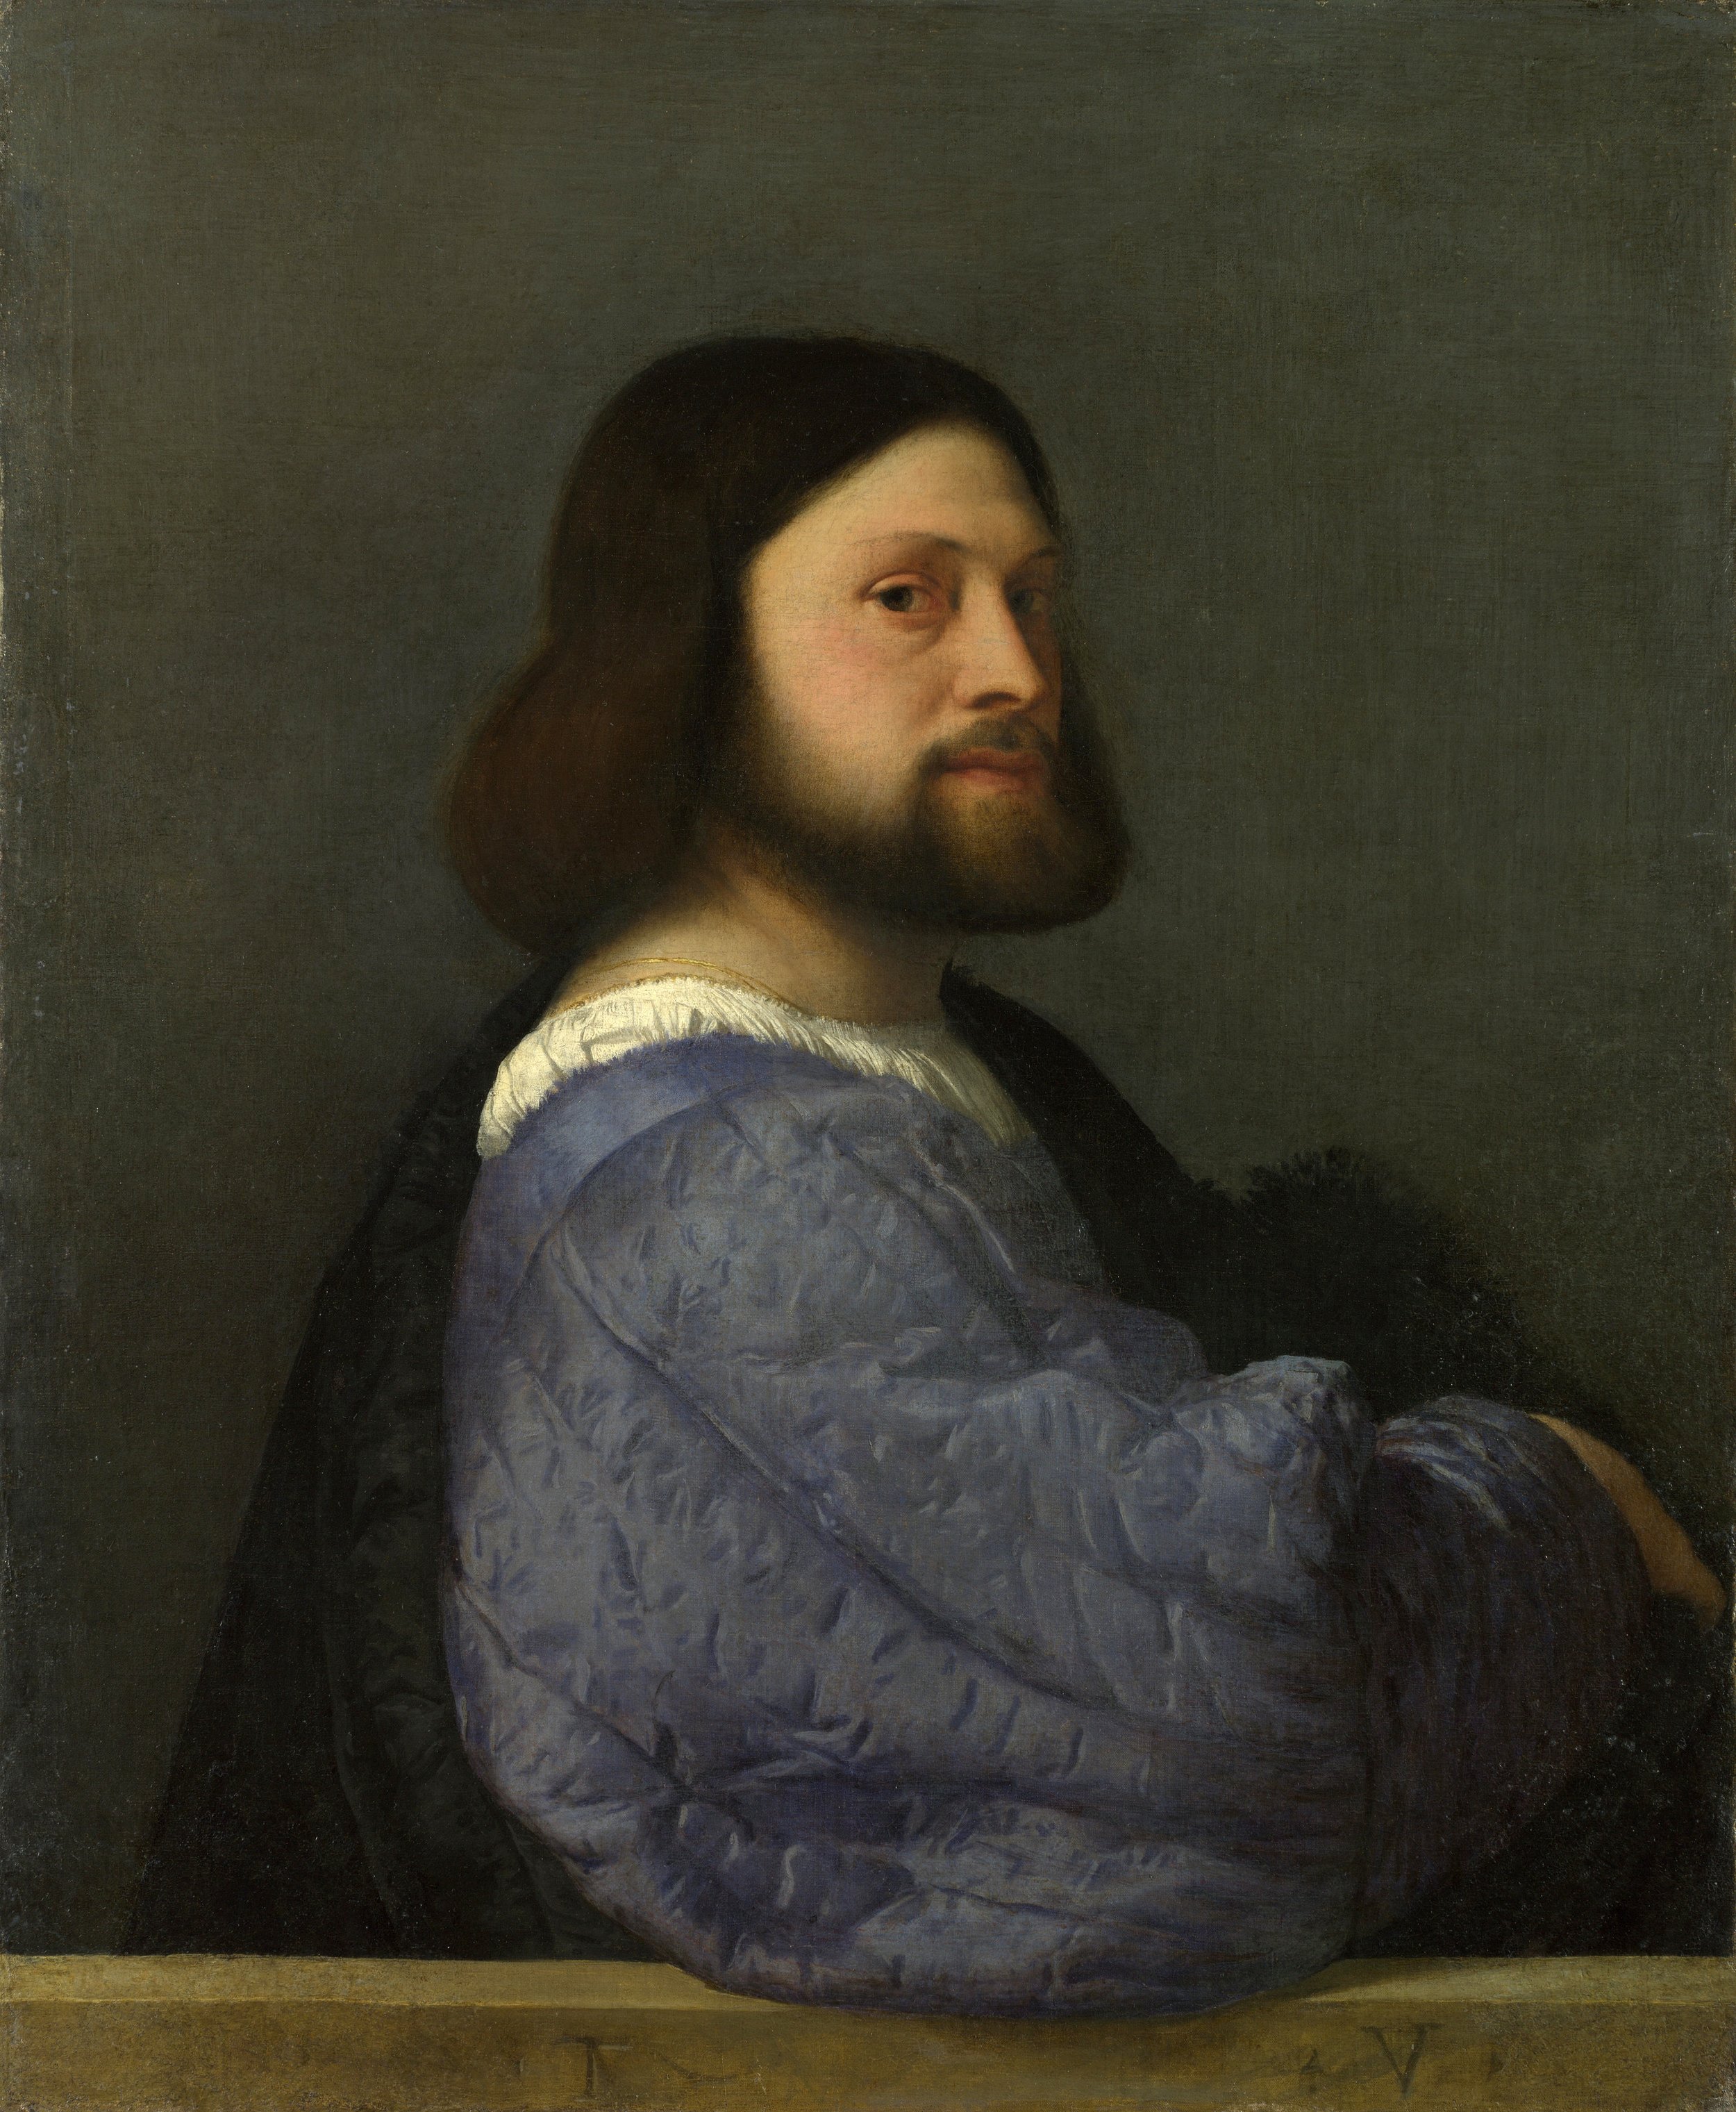 Titian. 'Portrait of a Man with a Quilted Sleeve